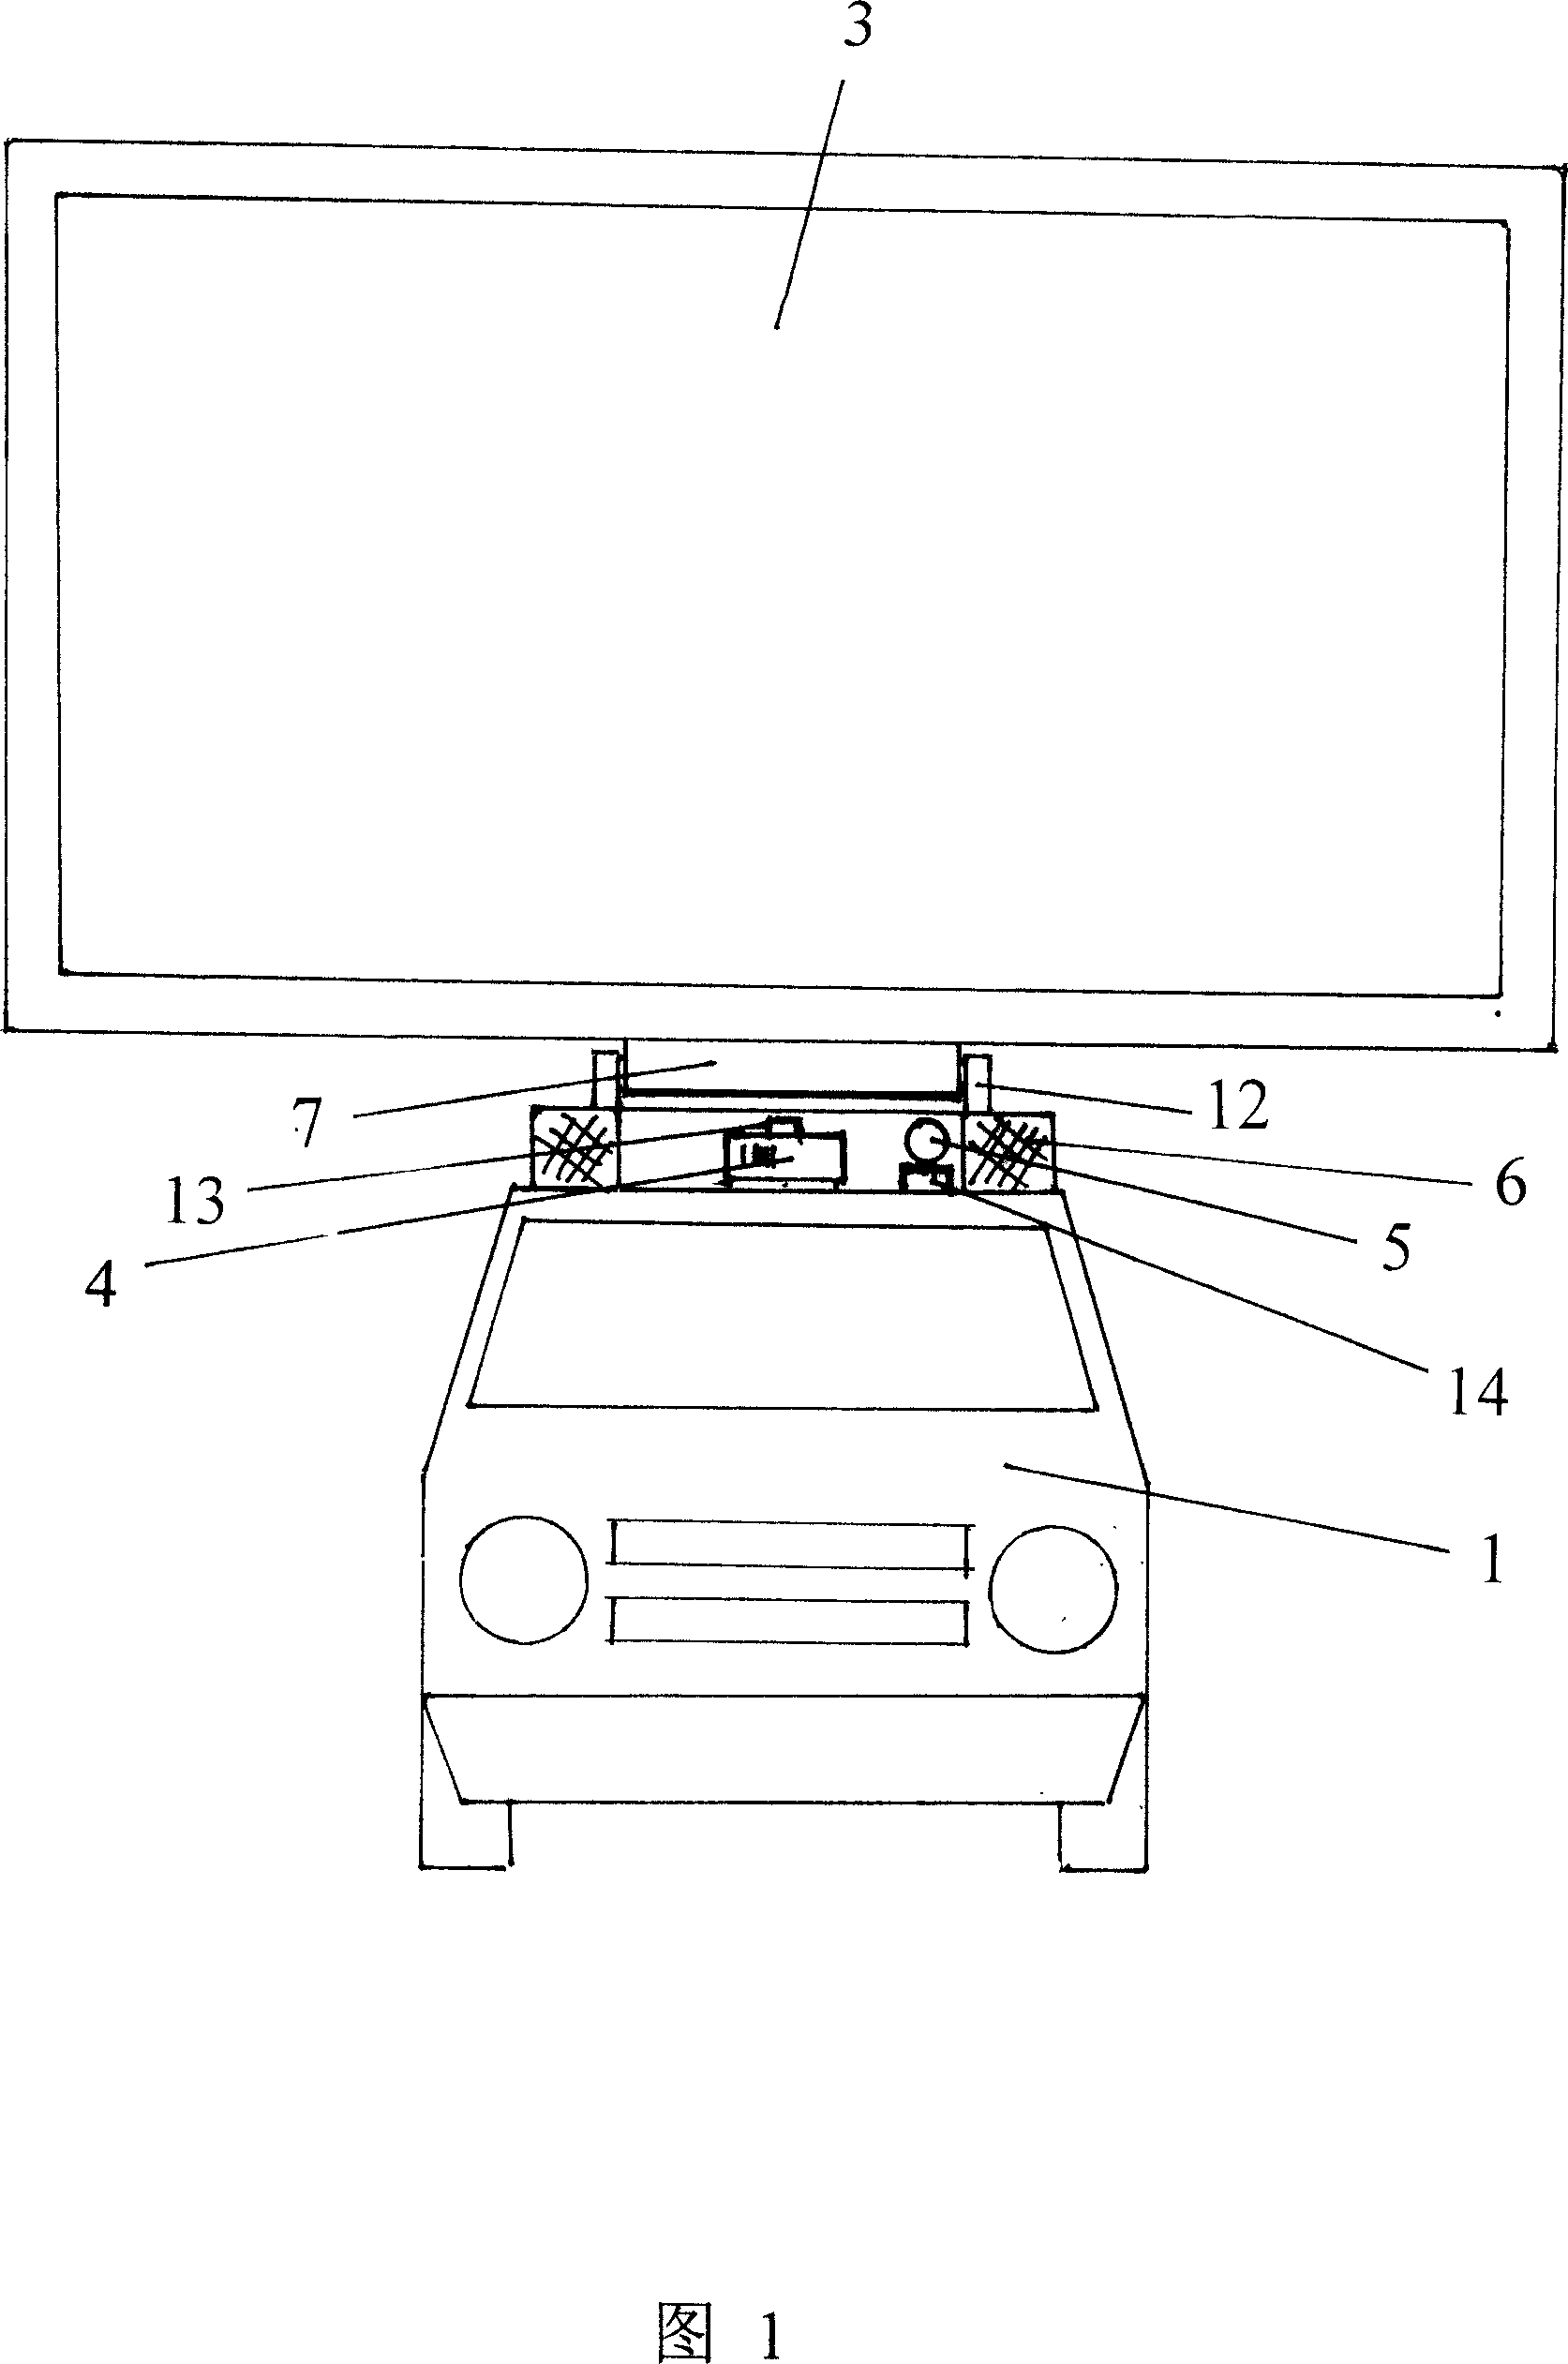 Vehicular video projection and play apparatus for high-brightness screen